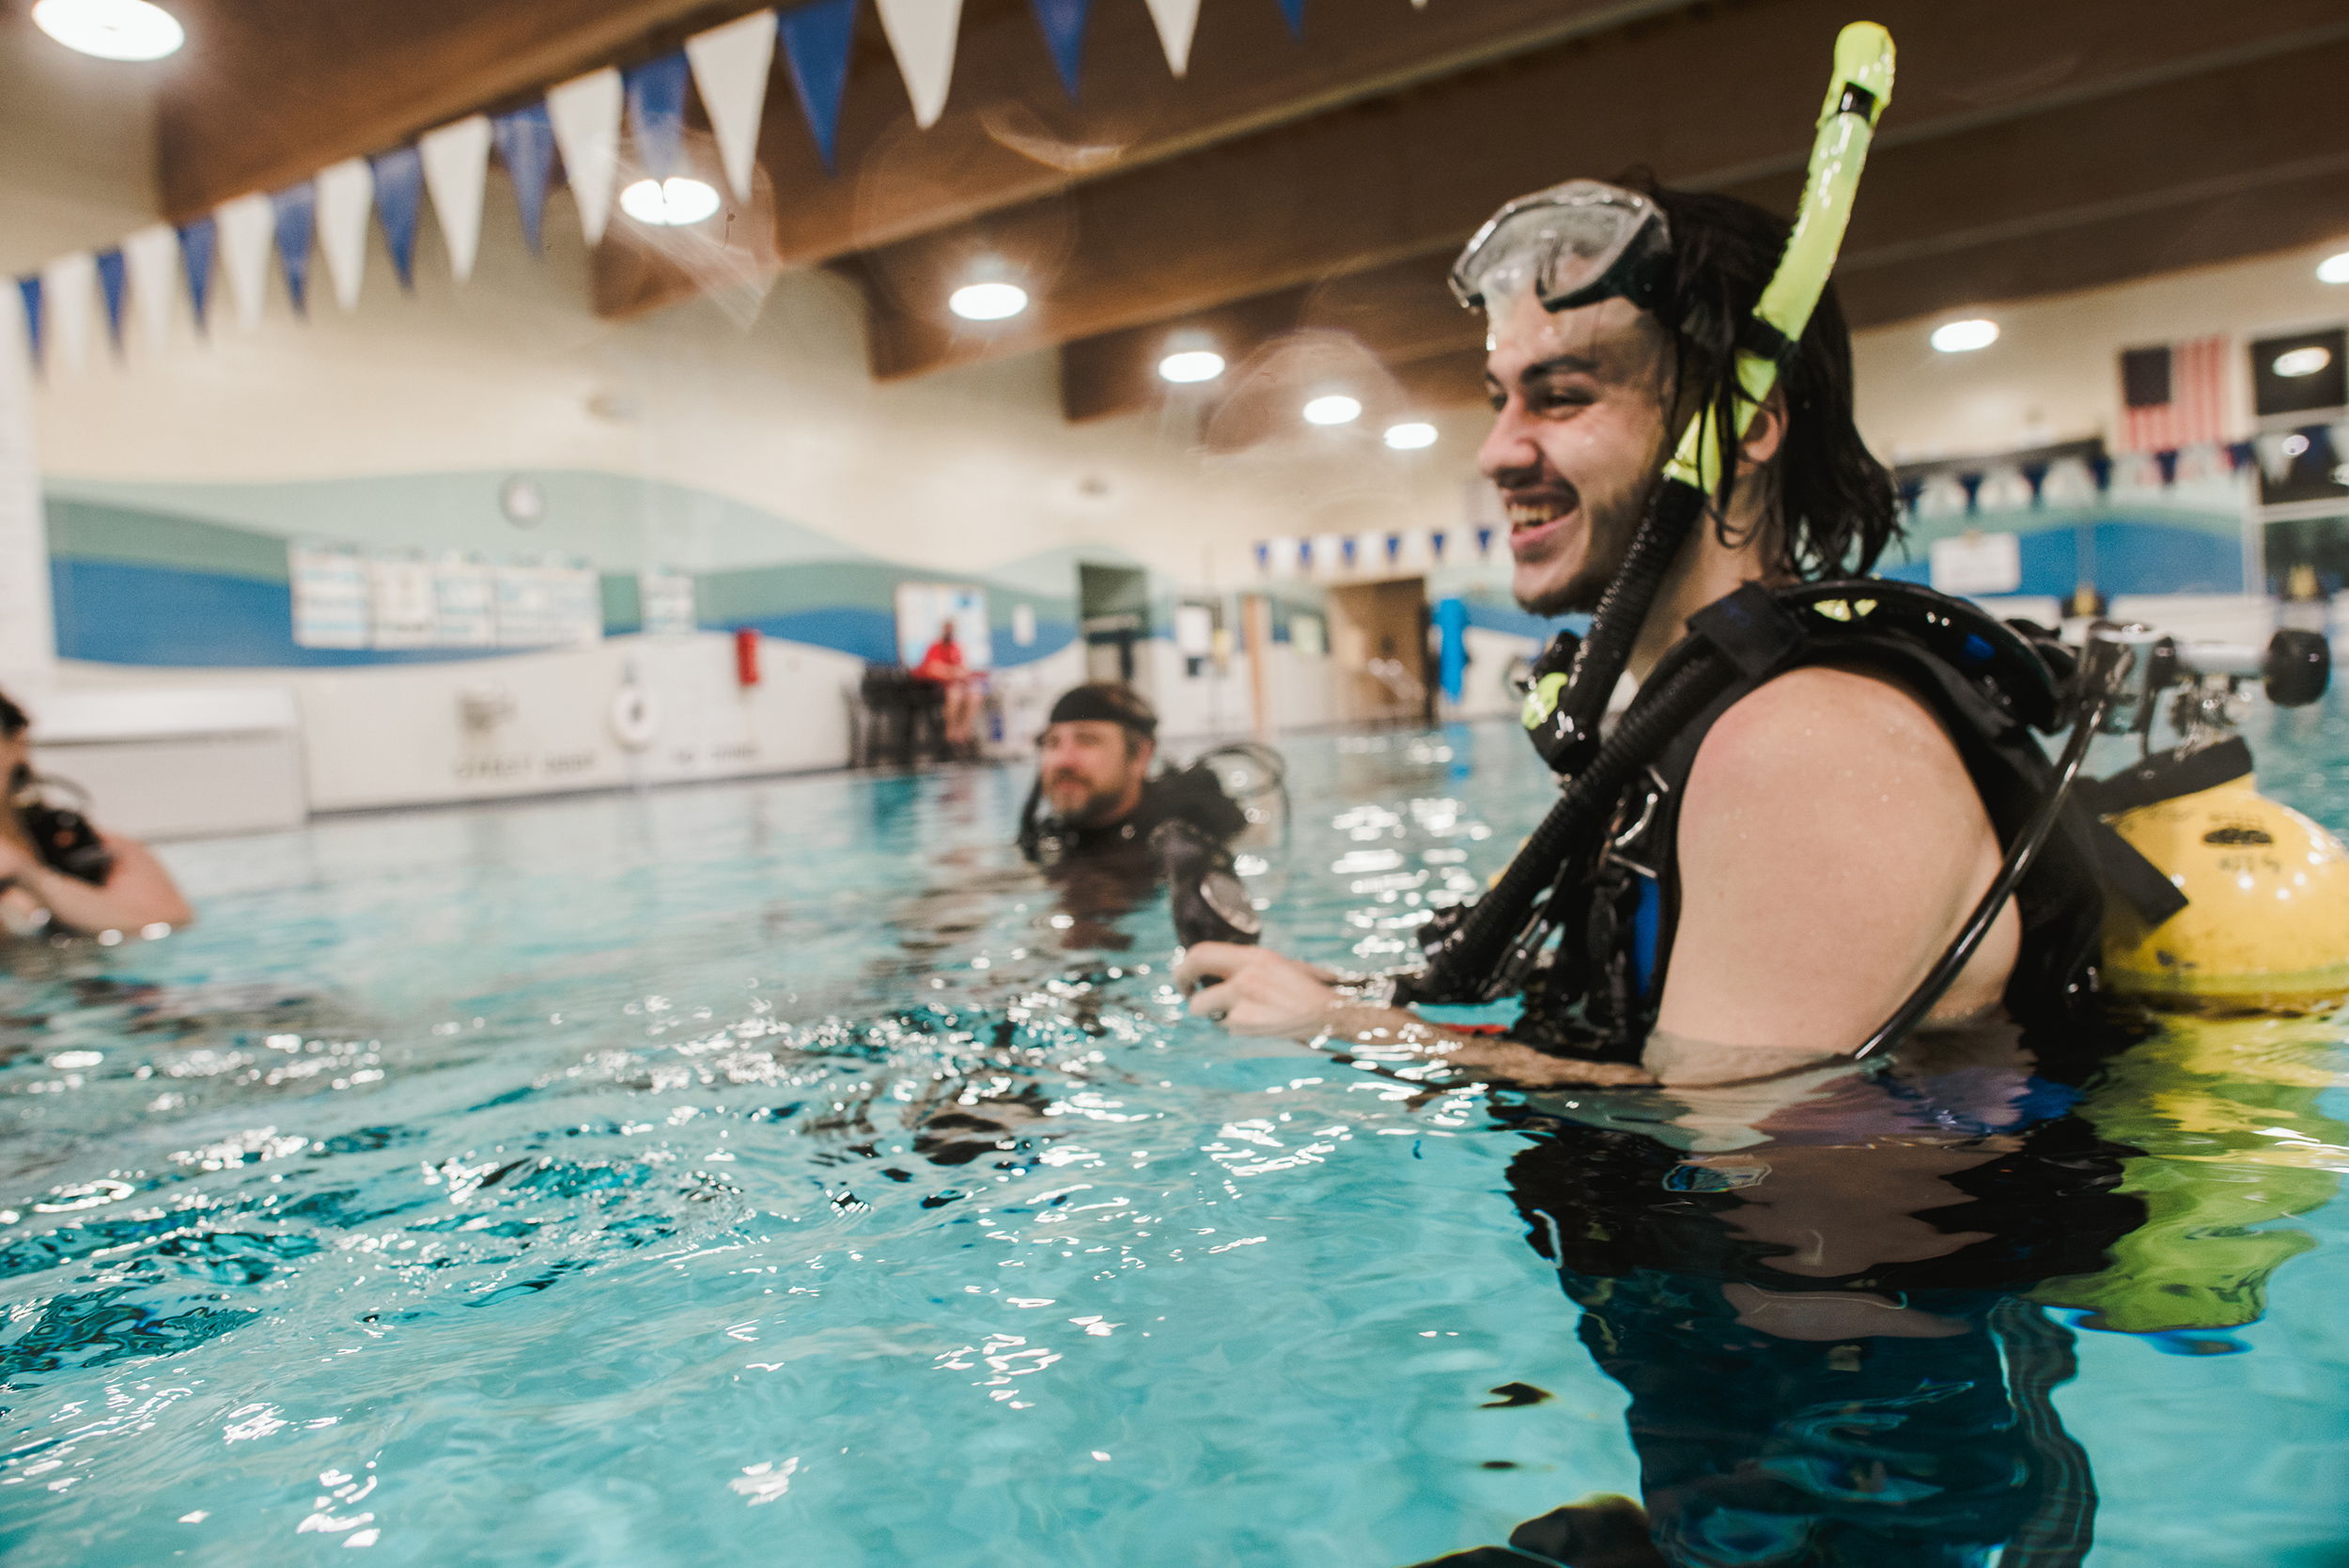 Science students practice scuba diving in the pool